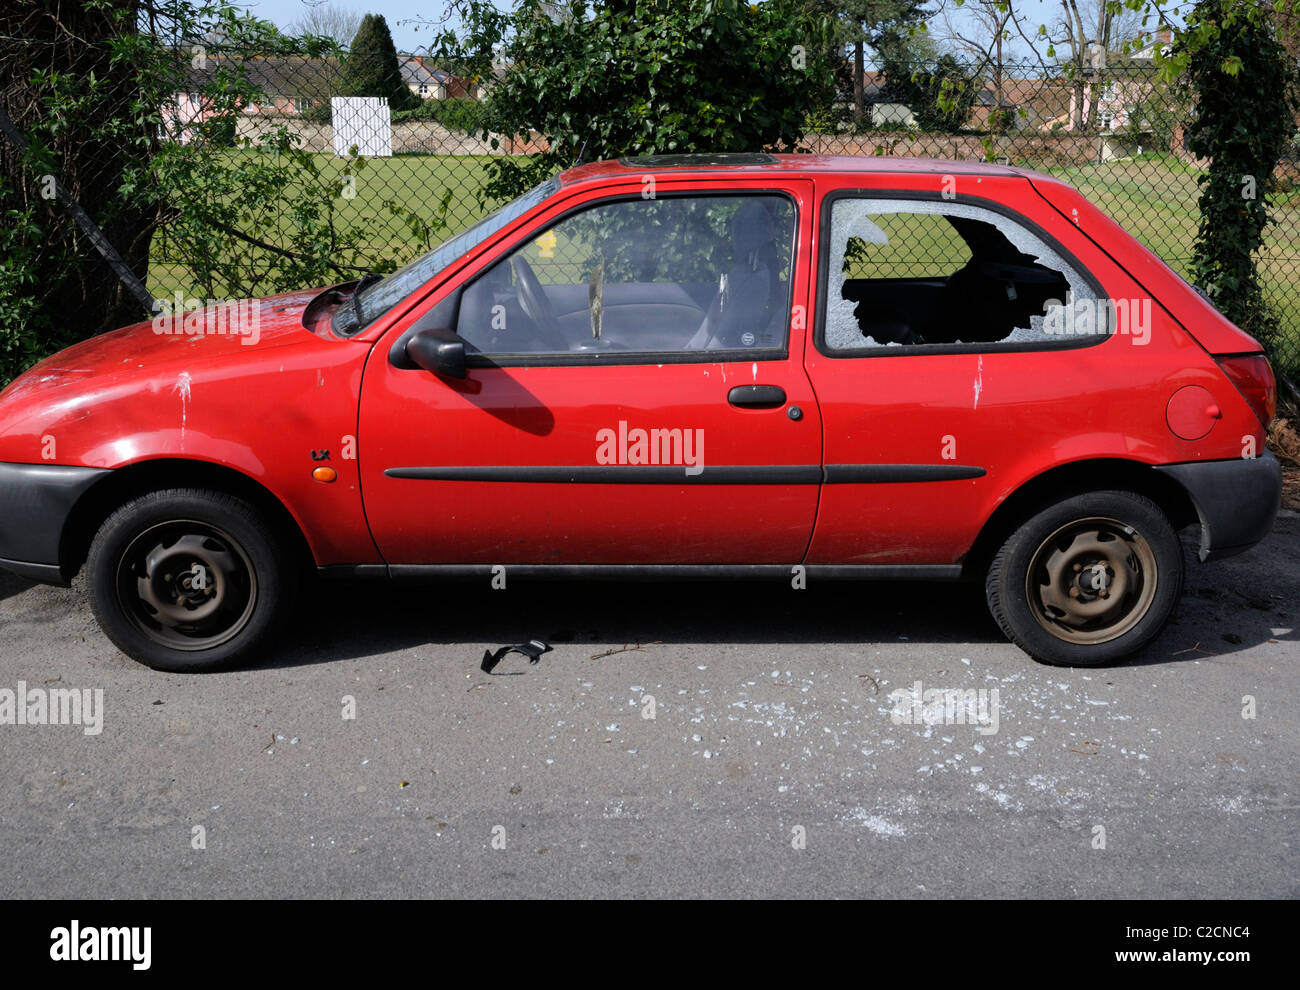 A car with a rear side window broken by 'smash and grab' thieves. Stock Photo